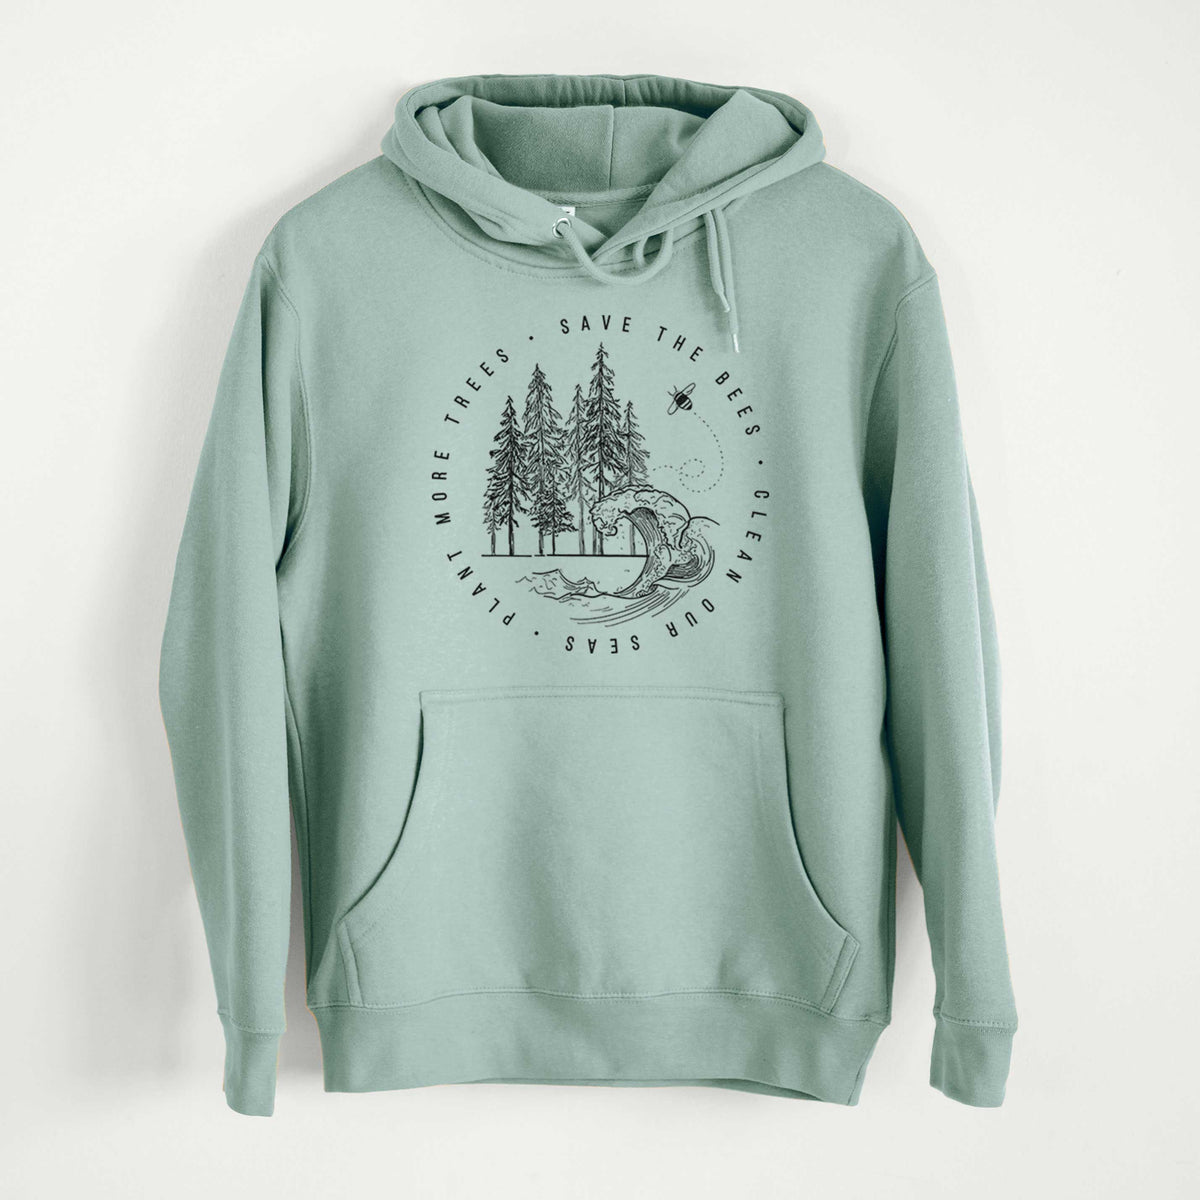 Save the Bees, Clean our Seas, Plant more Trees  - Mid-Weight Unisex Premium Blend Hoodie